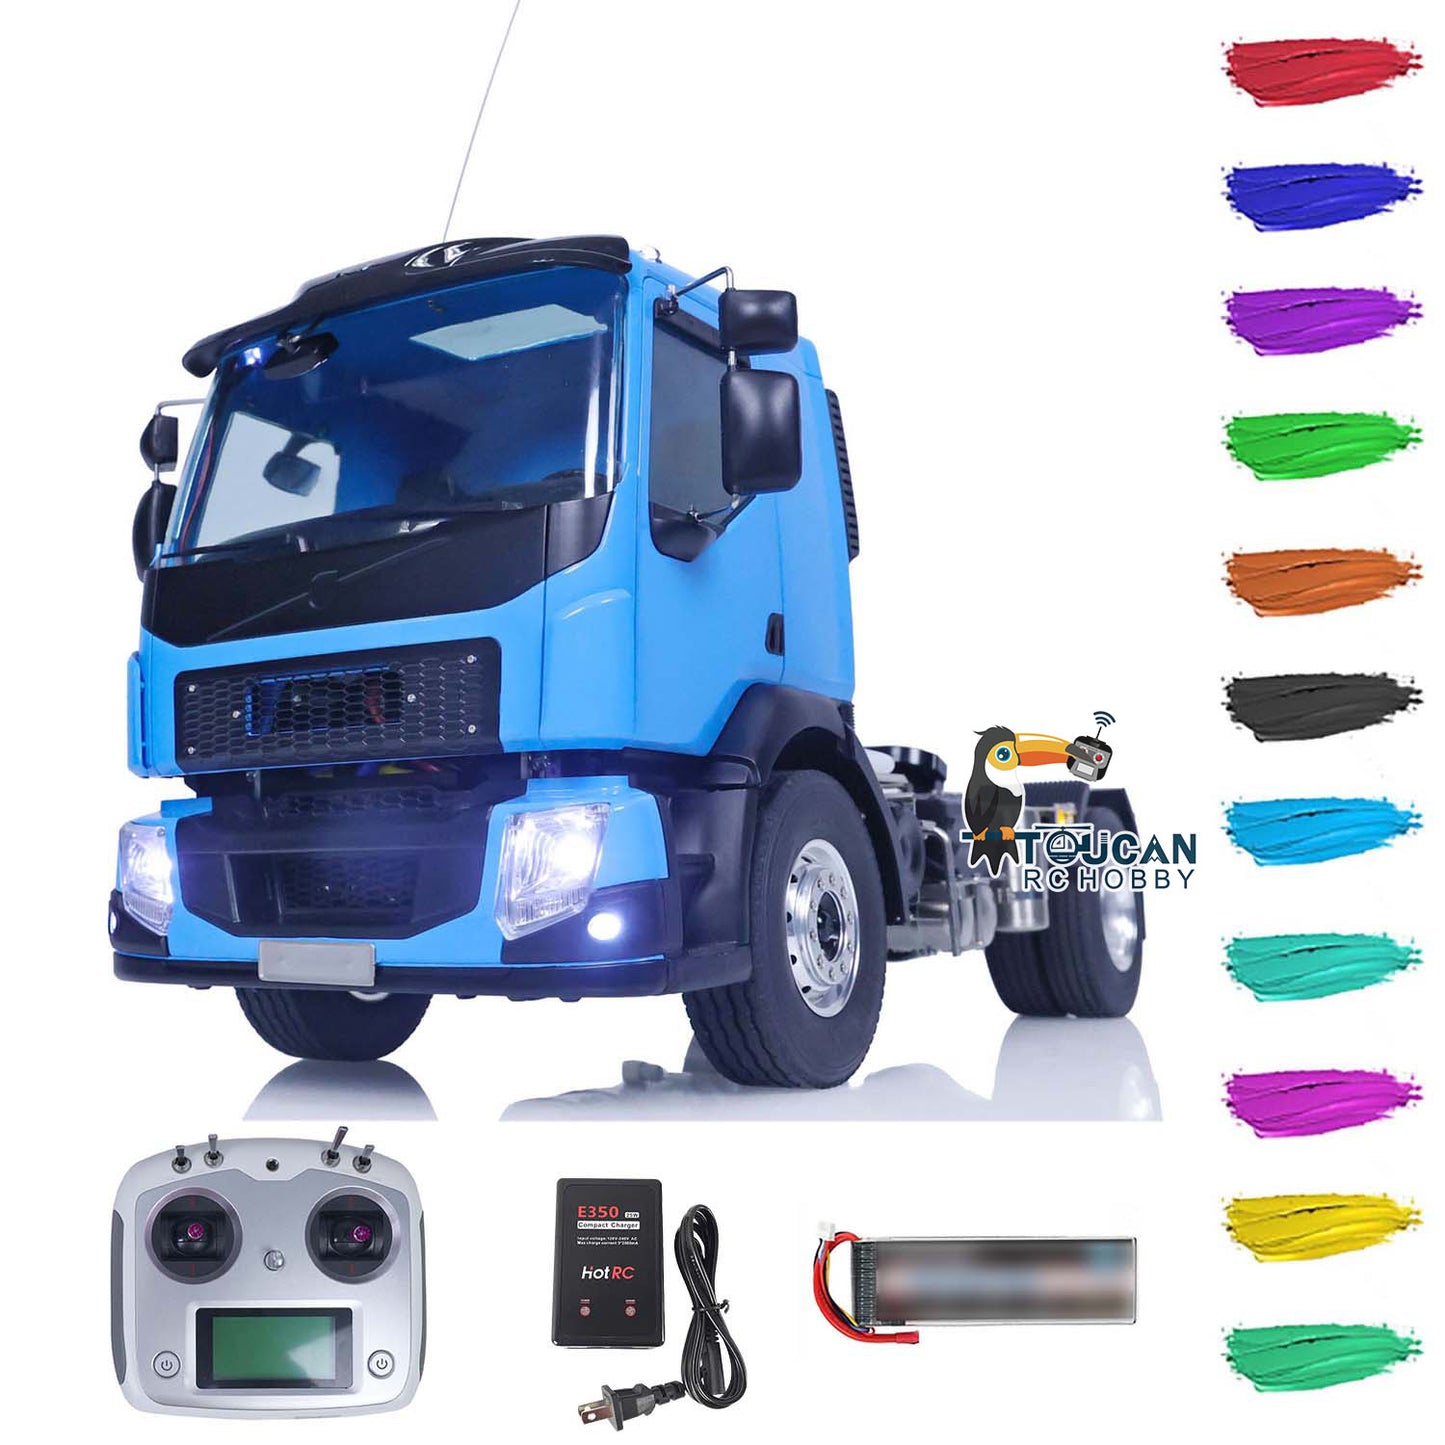 LESU 4x4 RC Tractor Truck 1/14 RTR Painted Assembled Radio Controlled Car Light Battery Metal Chassis ESC Motor